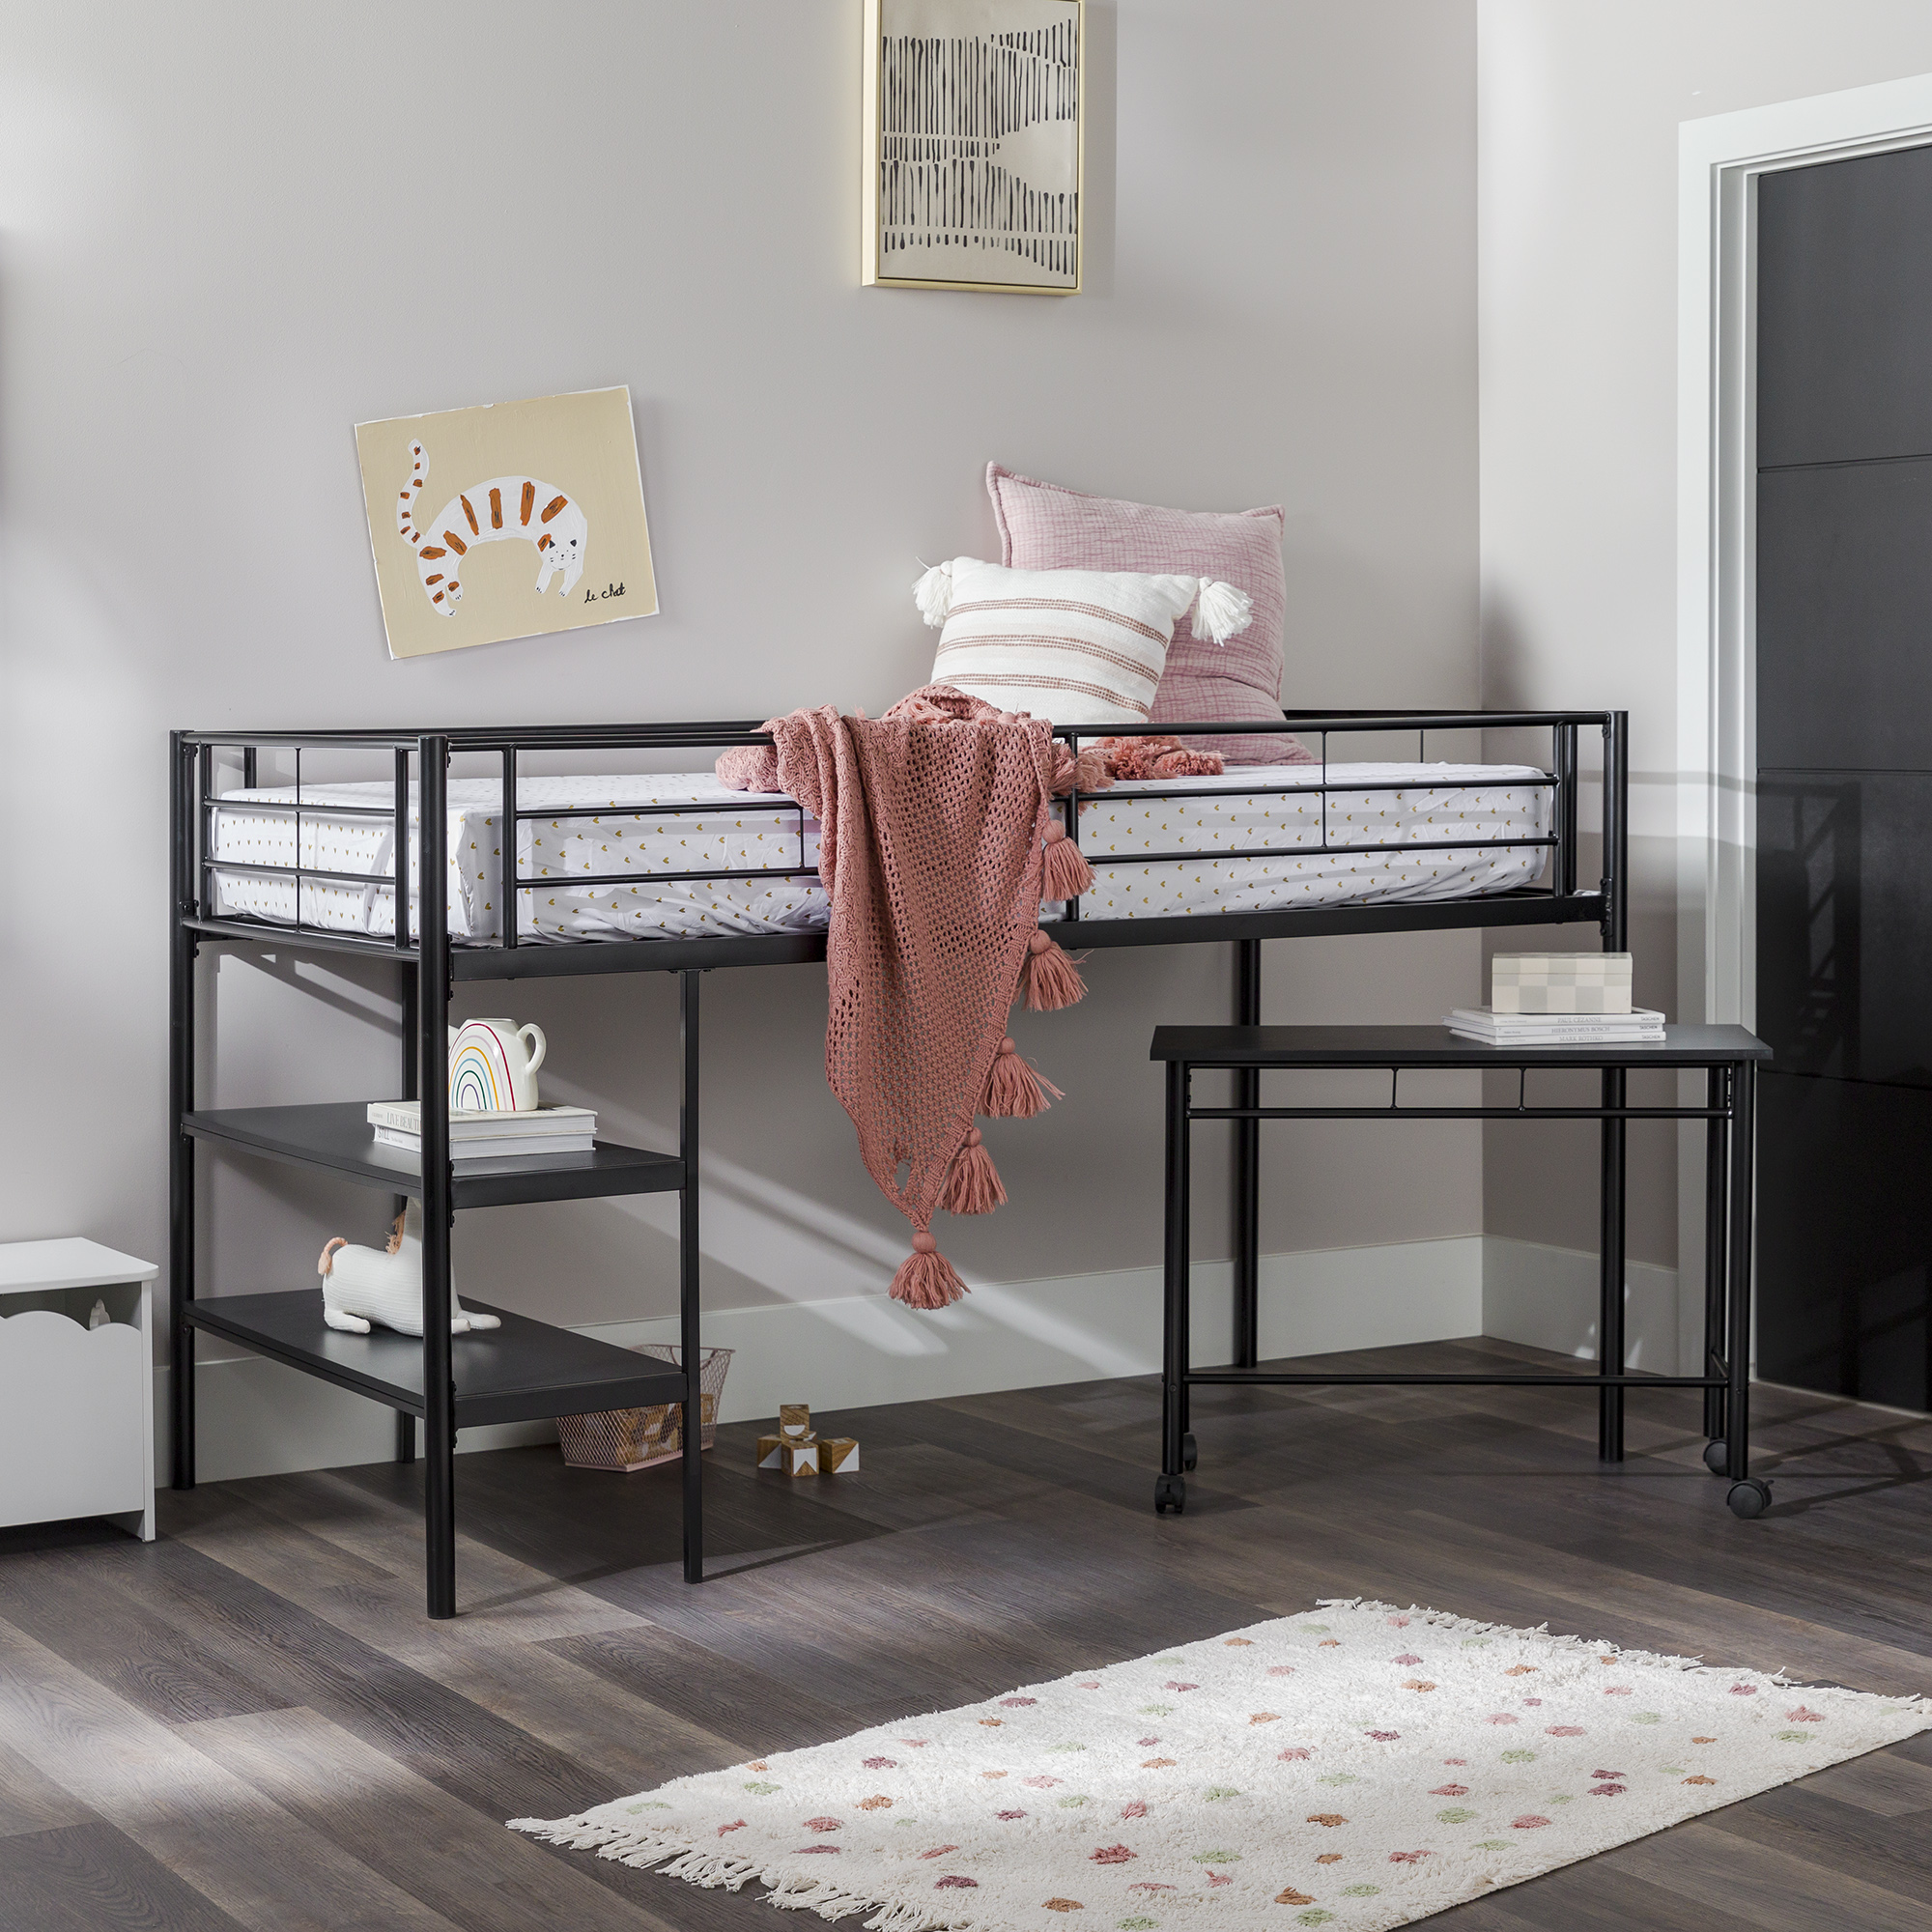 Walker Edison Twin Metal Loft Bed with Desk and Shelving, Black - image 1 of 19